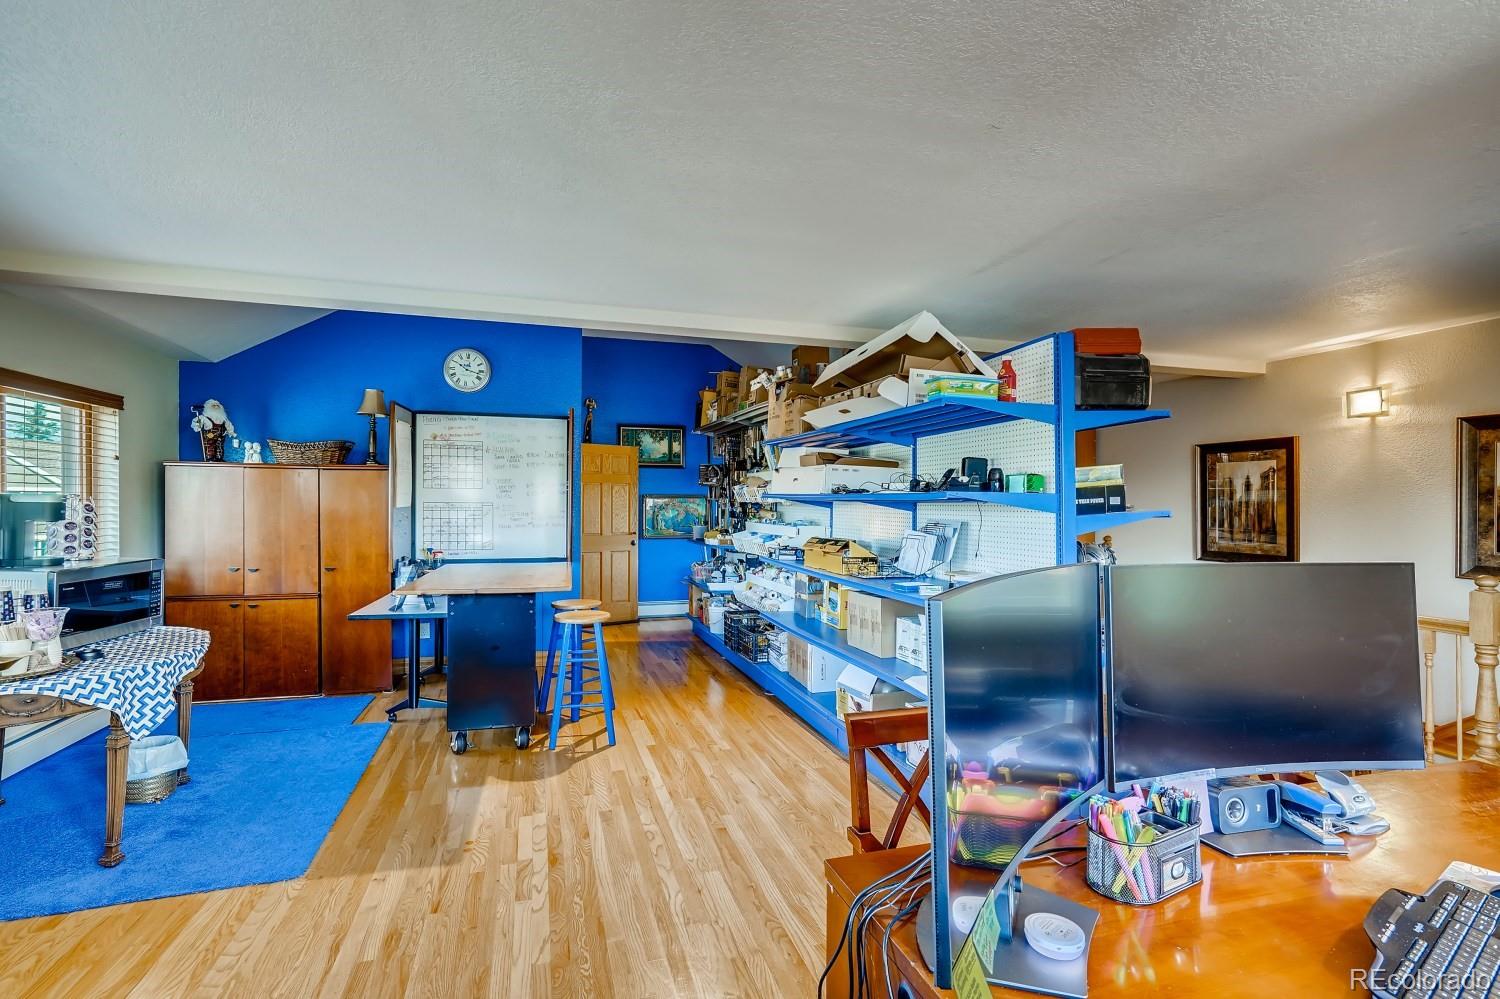 6820 Orion, Arvada, CO